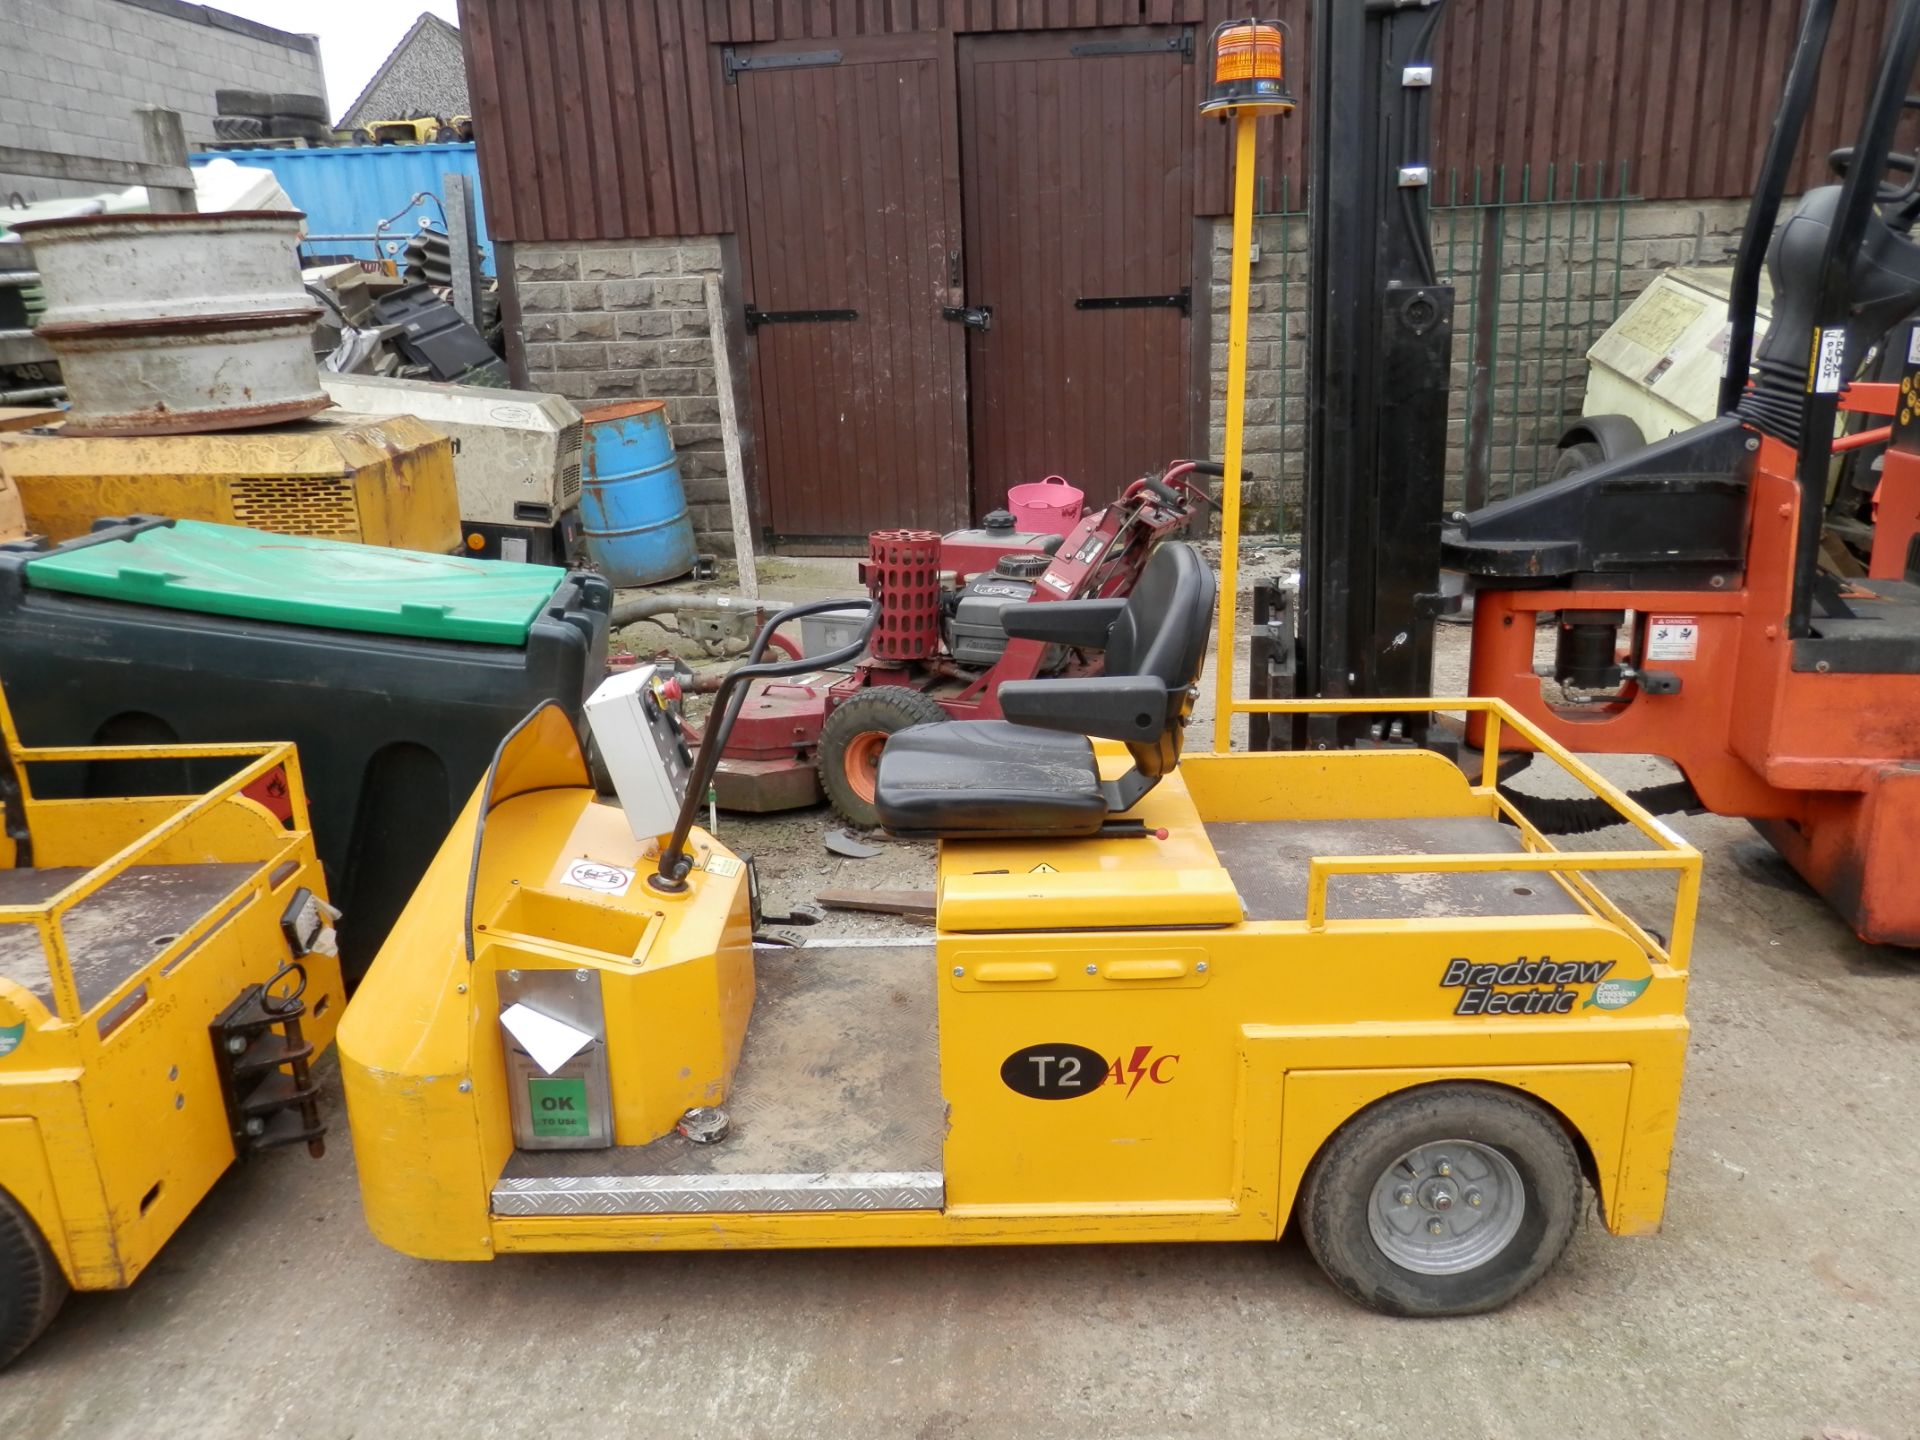 DS - 2011 BRADSHAW T2 ELECTRIC TUG/TOW TRACTOR, WORKING READY FOR USE. 1.5 TONNE TOW CAPACITY. - Image 2 of 9